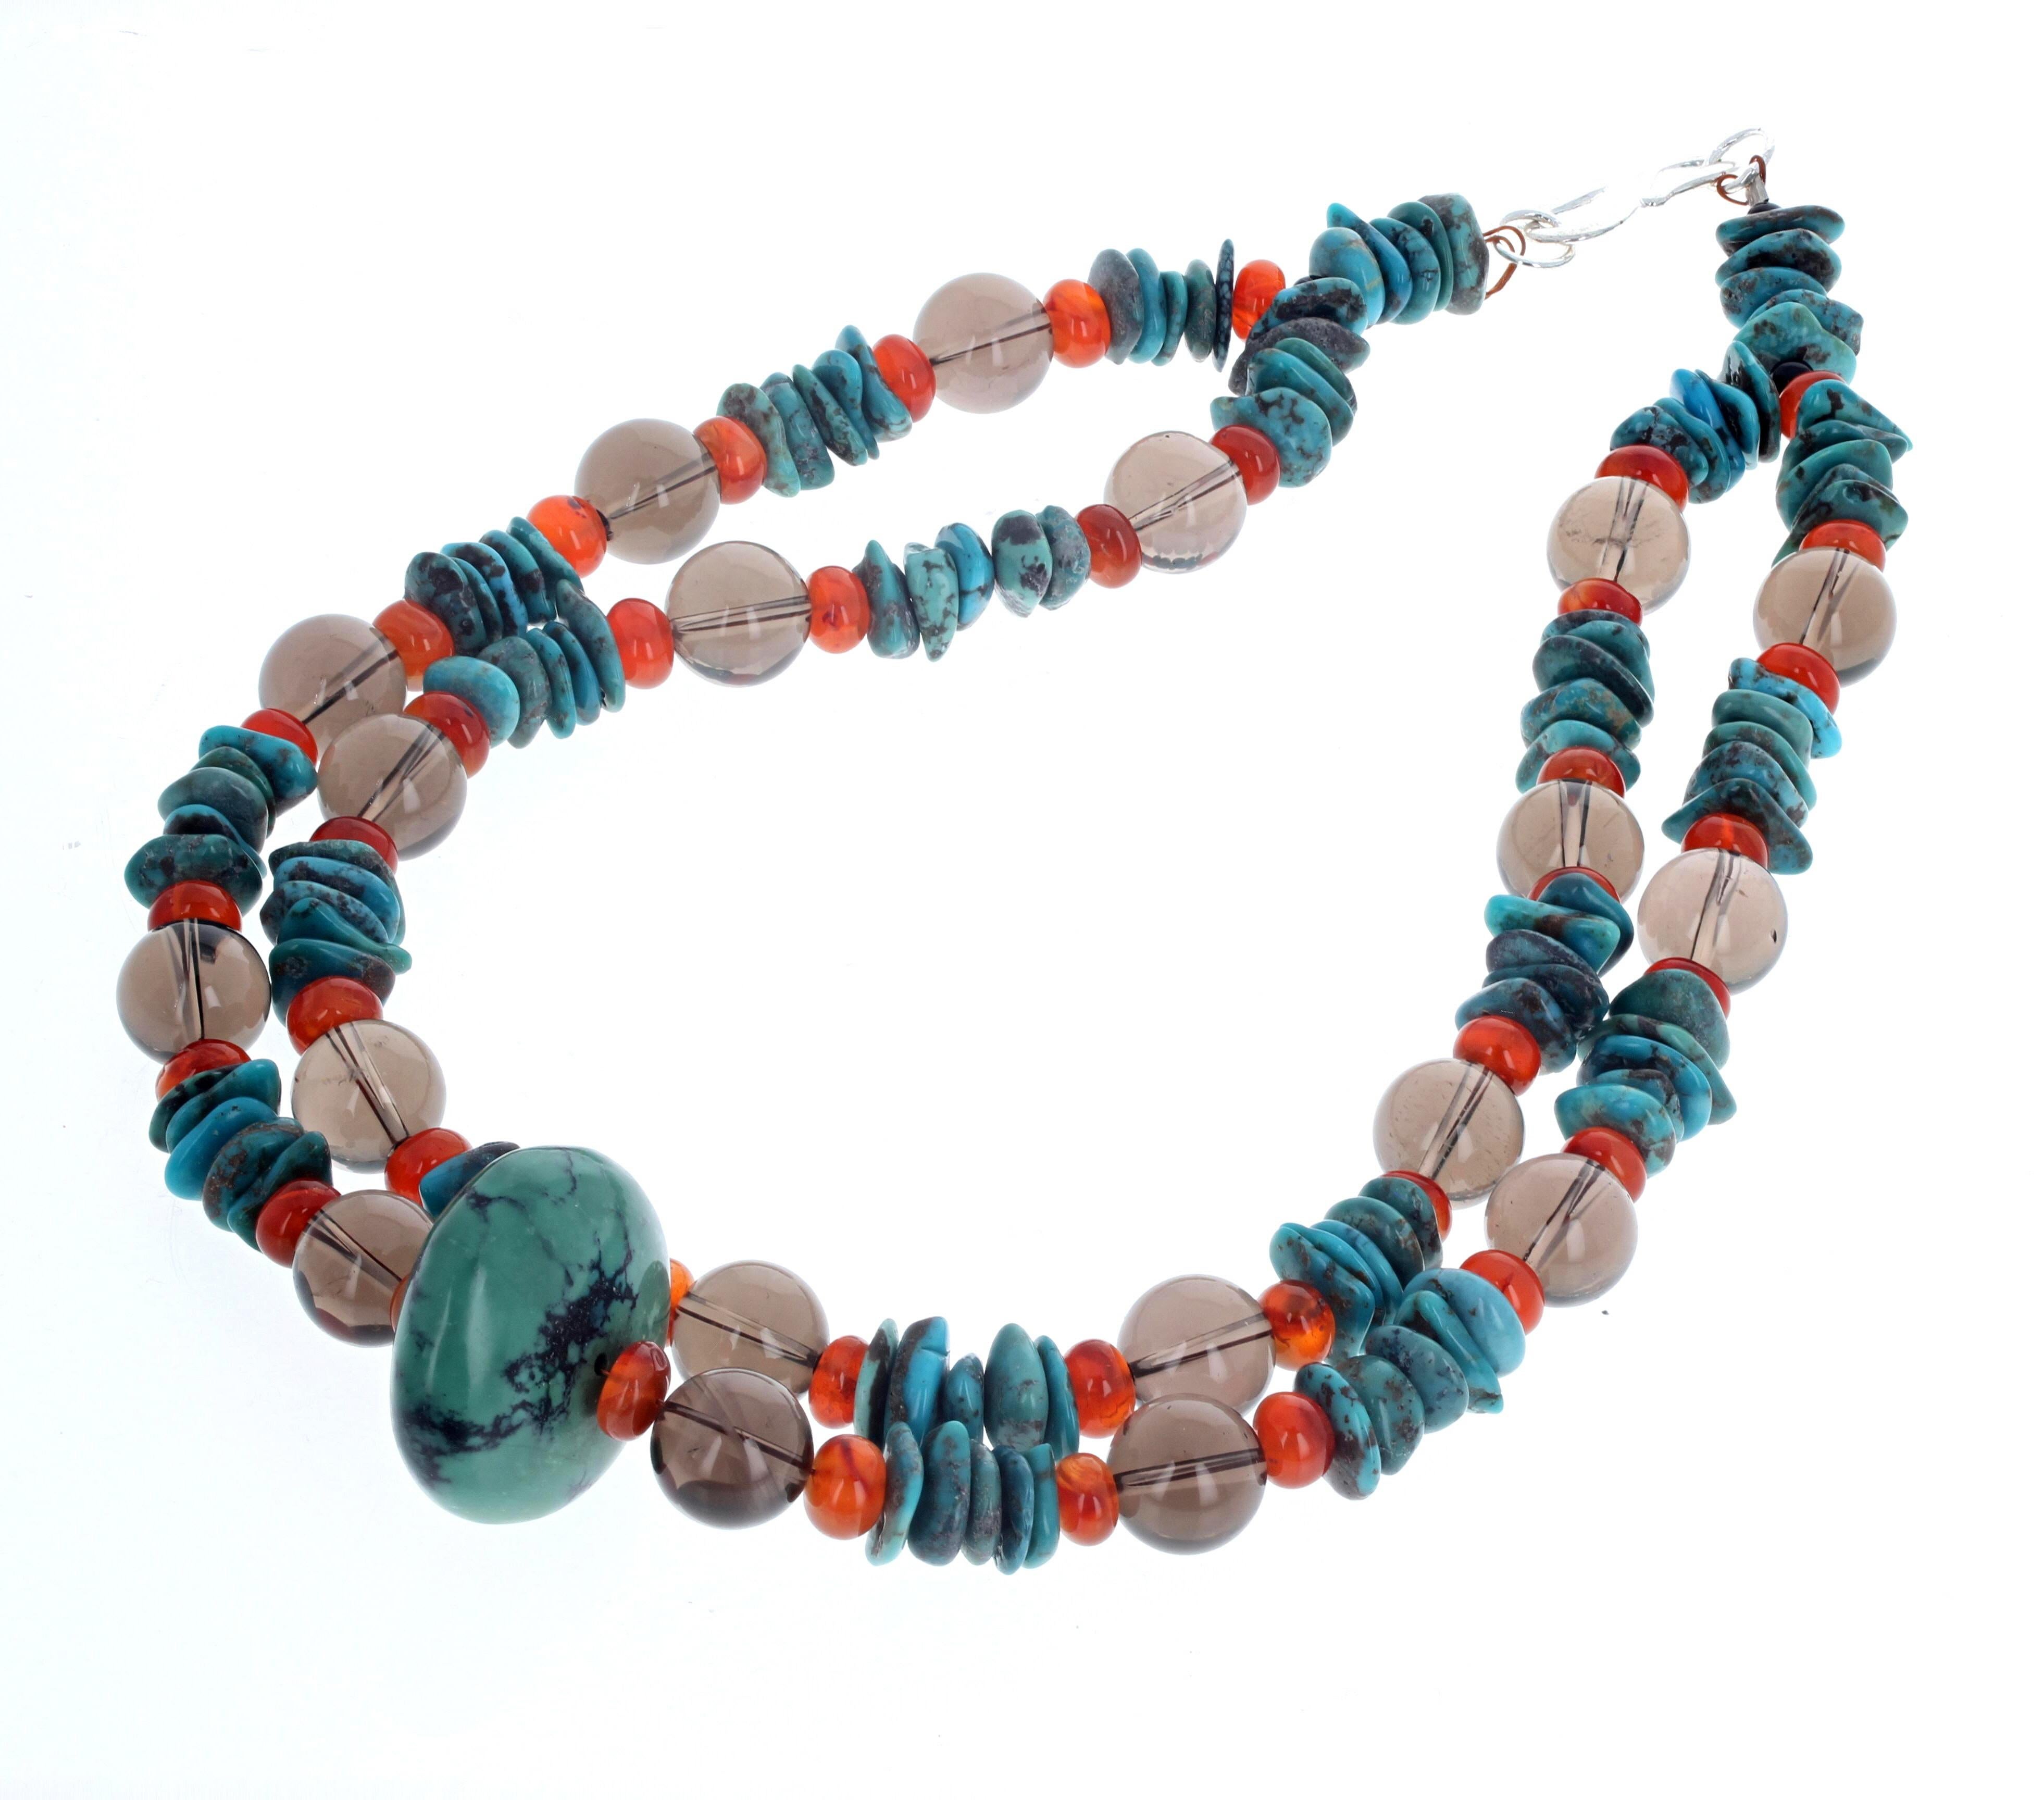 Mixed Cut AJD Beautiful Natural Turquoise, Smoky Quartz & Carnelian 17 Necklace For Sale